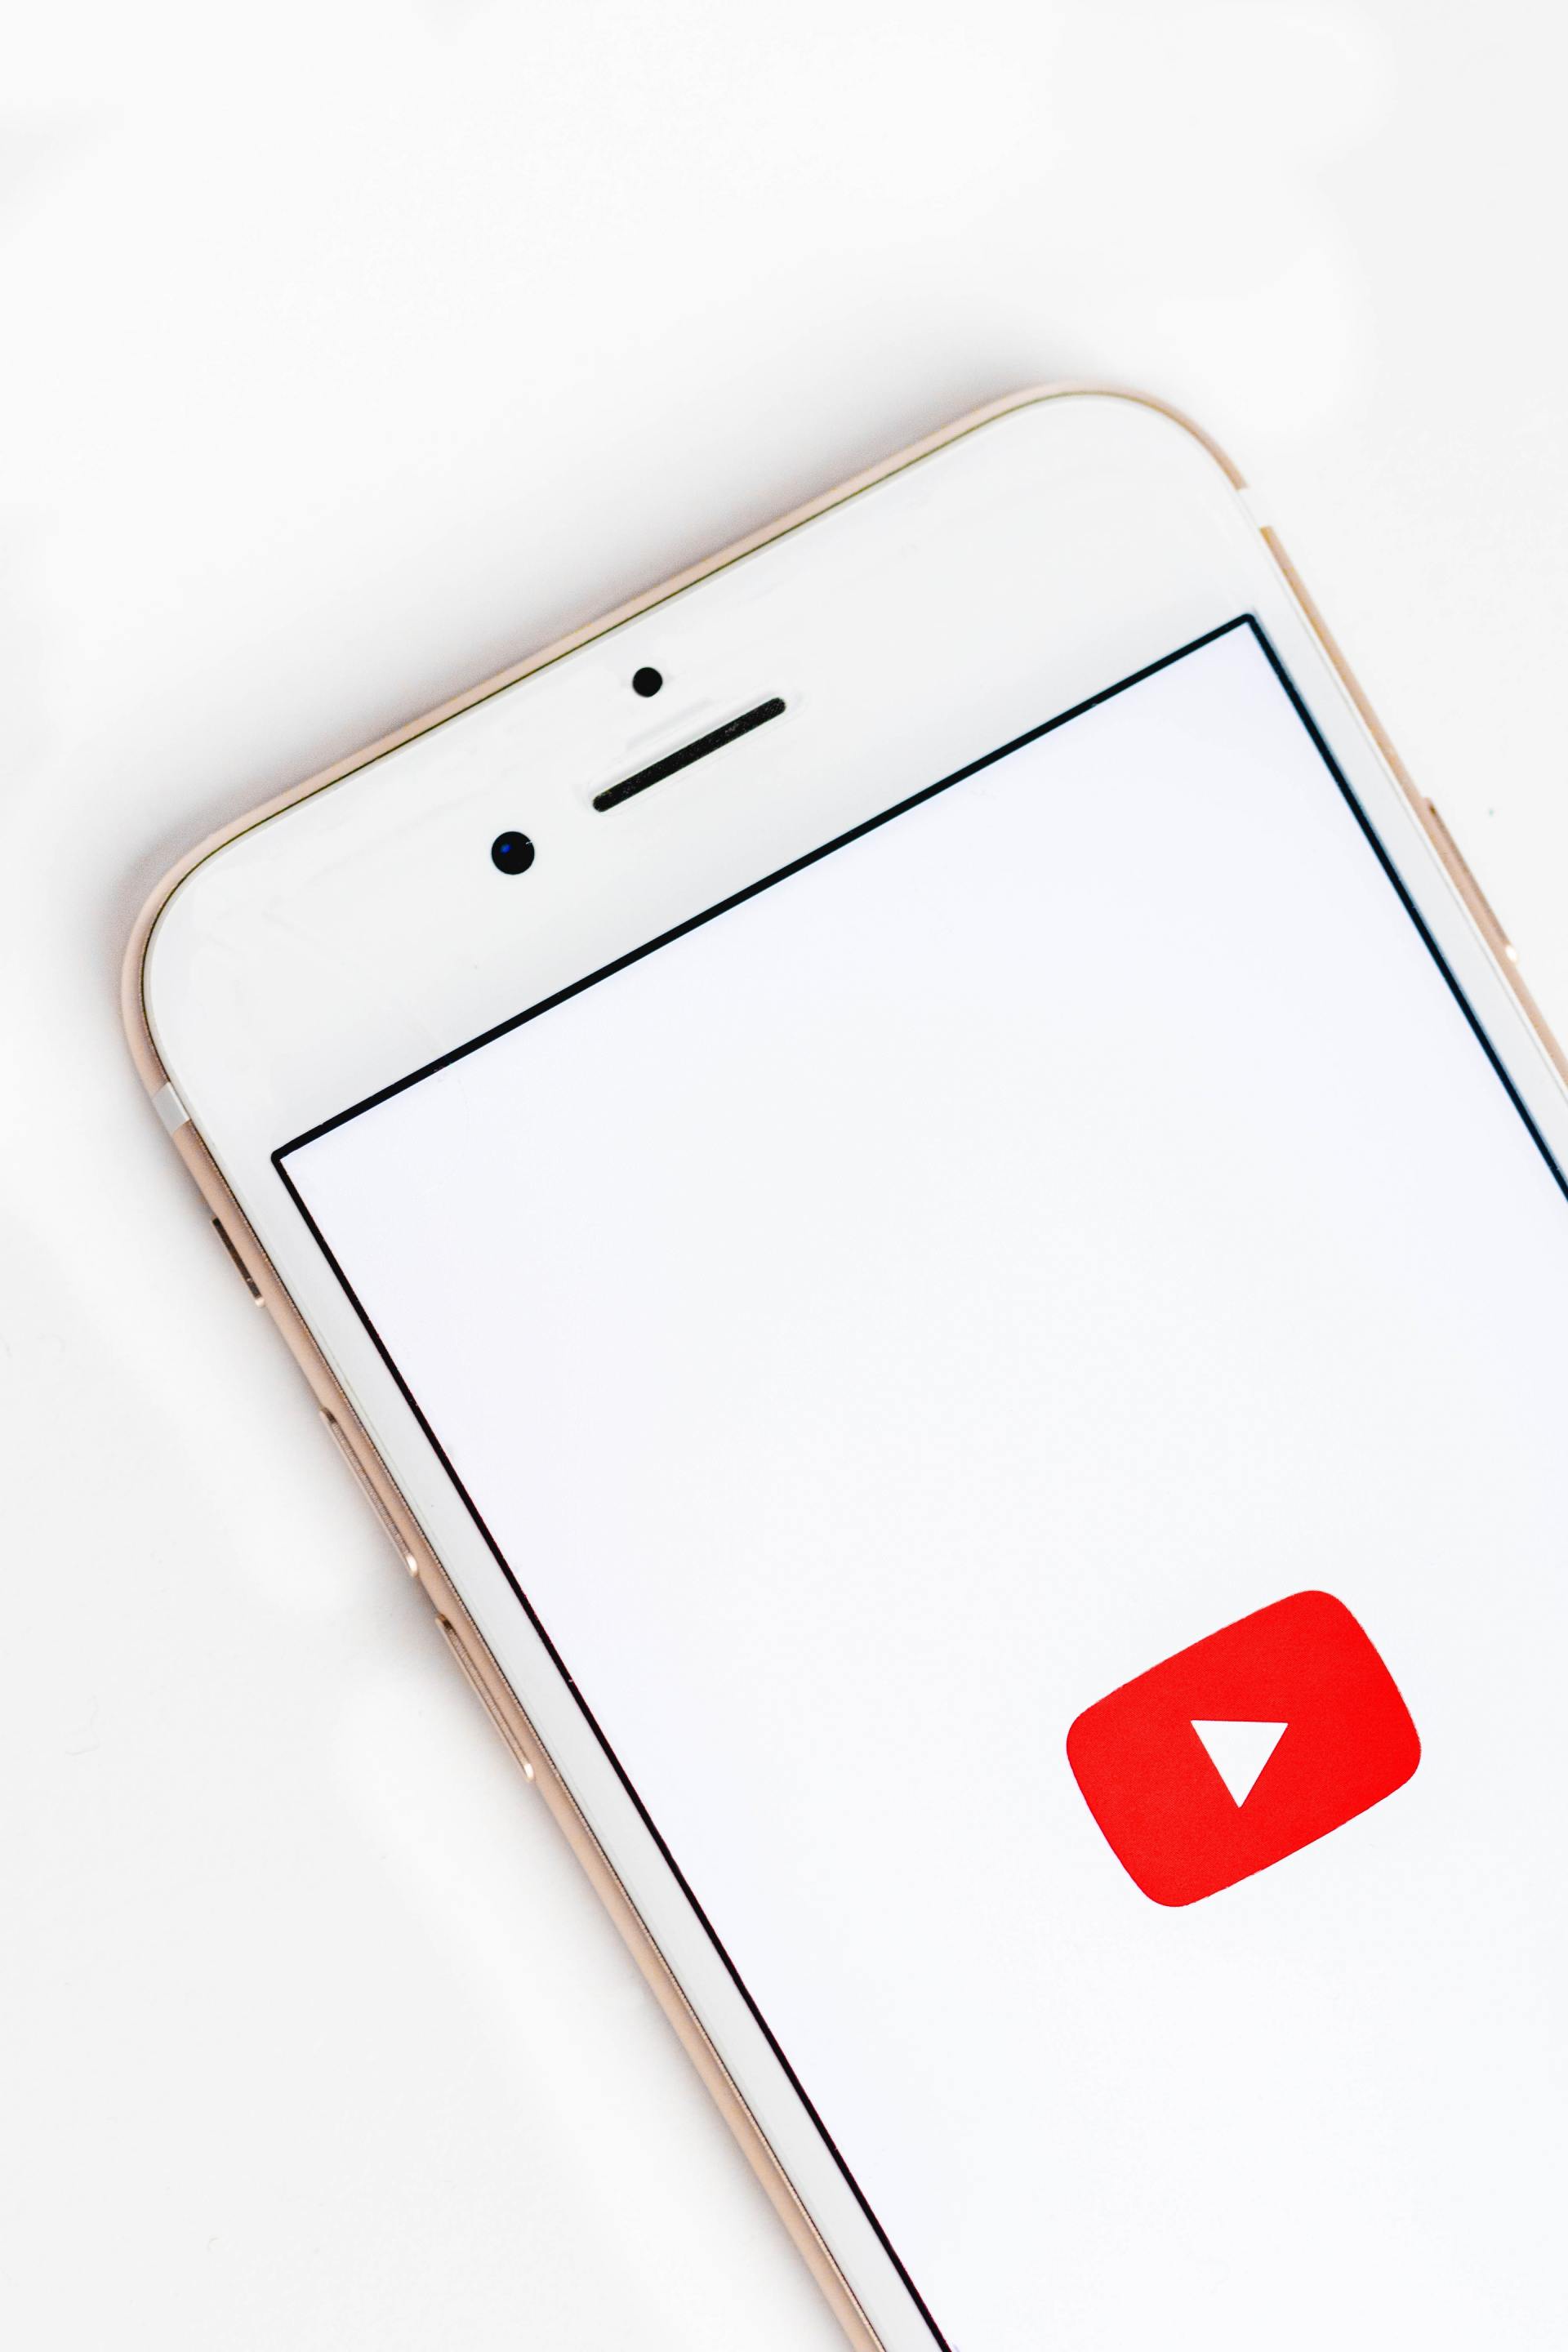 Supercharge your social media marketing with video